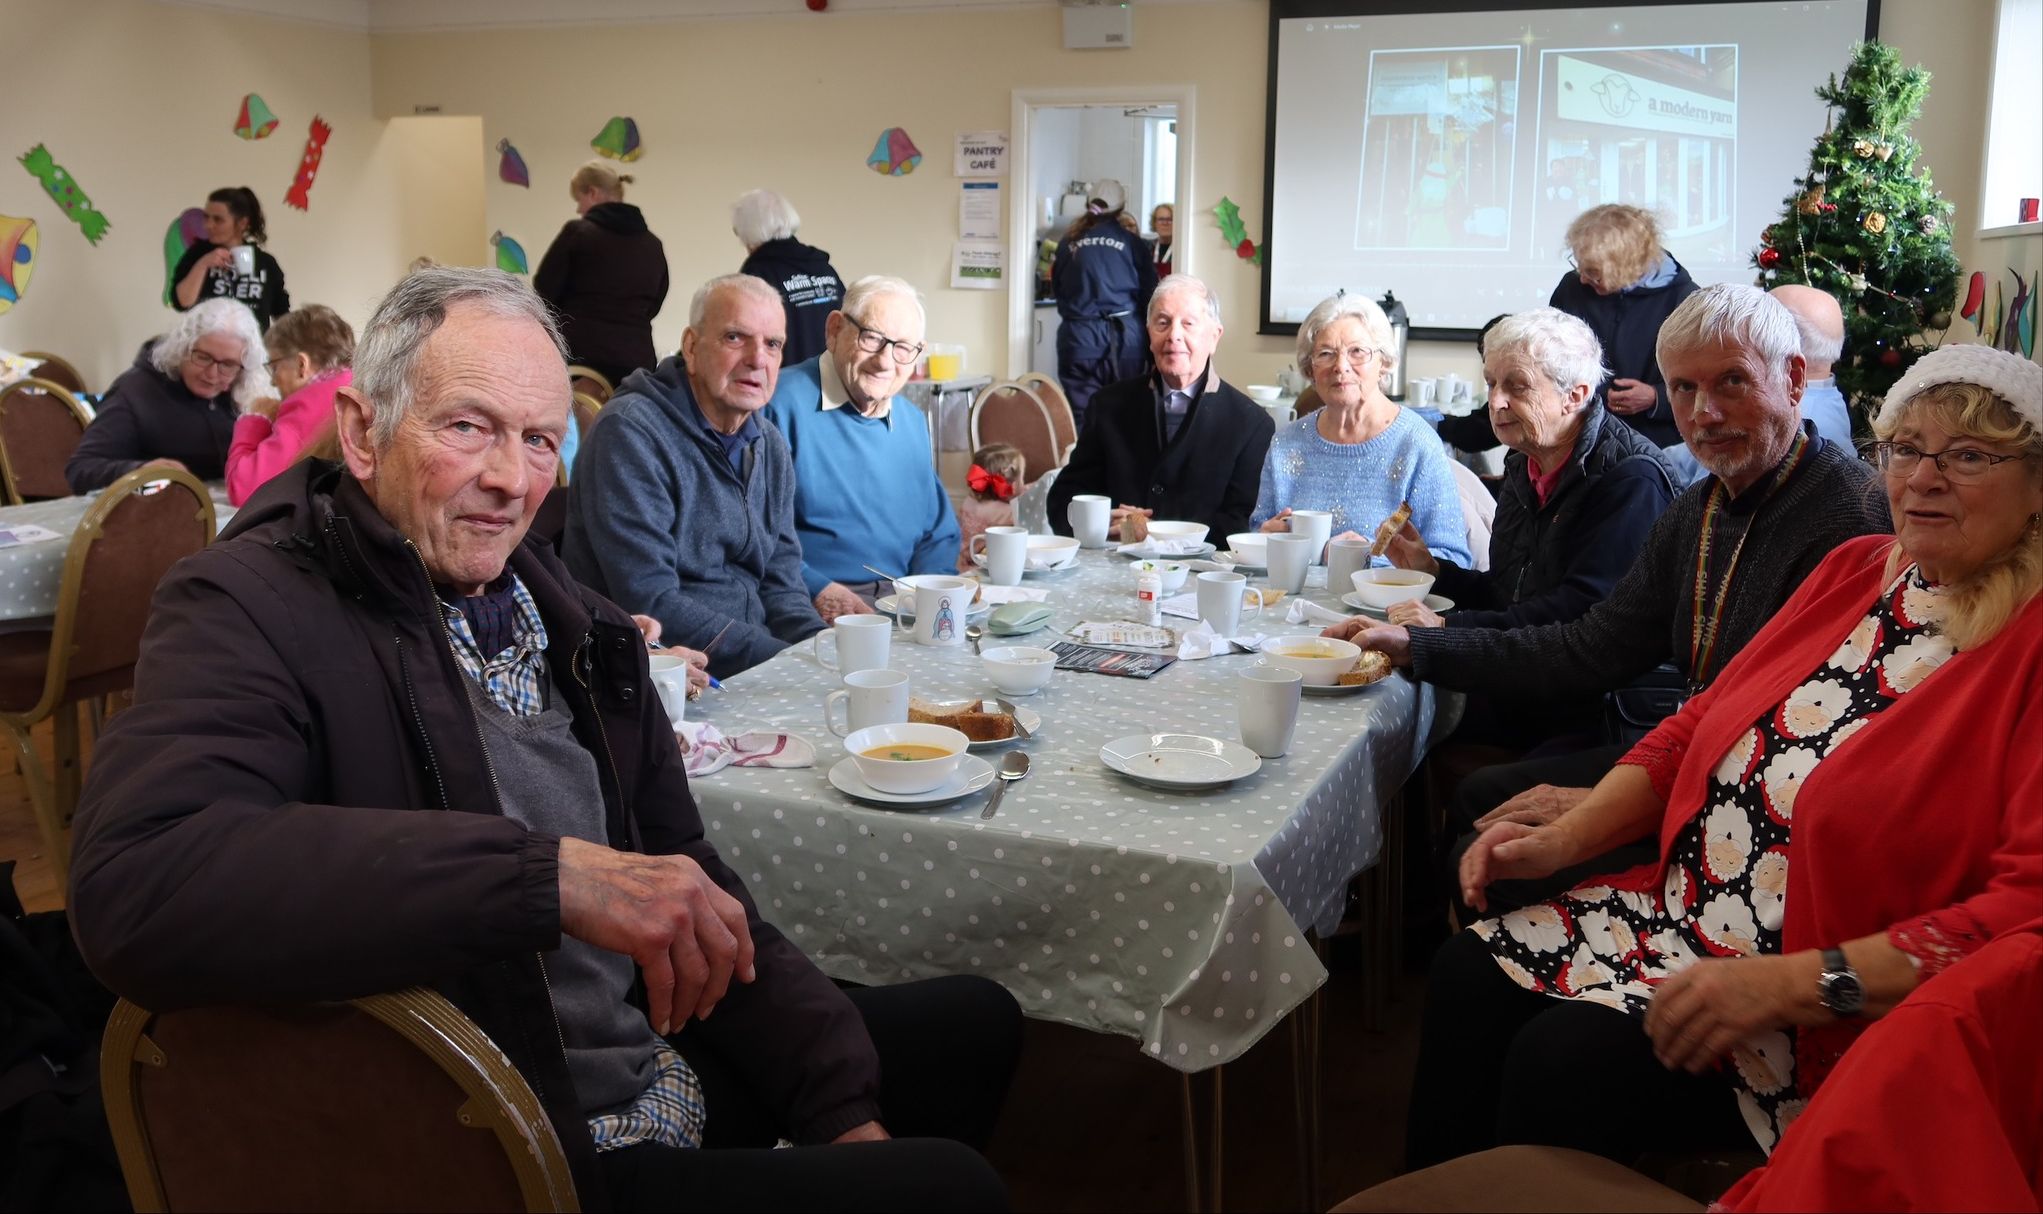 Guests enjoyed Christmas festivities with the Compassion Acts charity in Southport